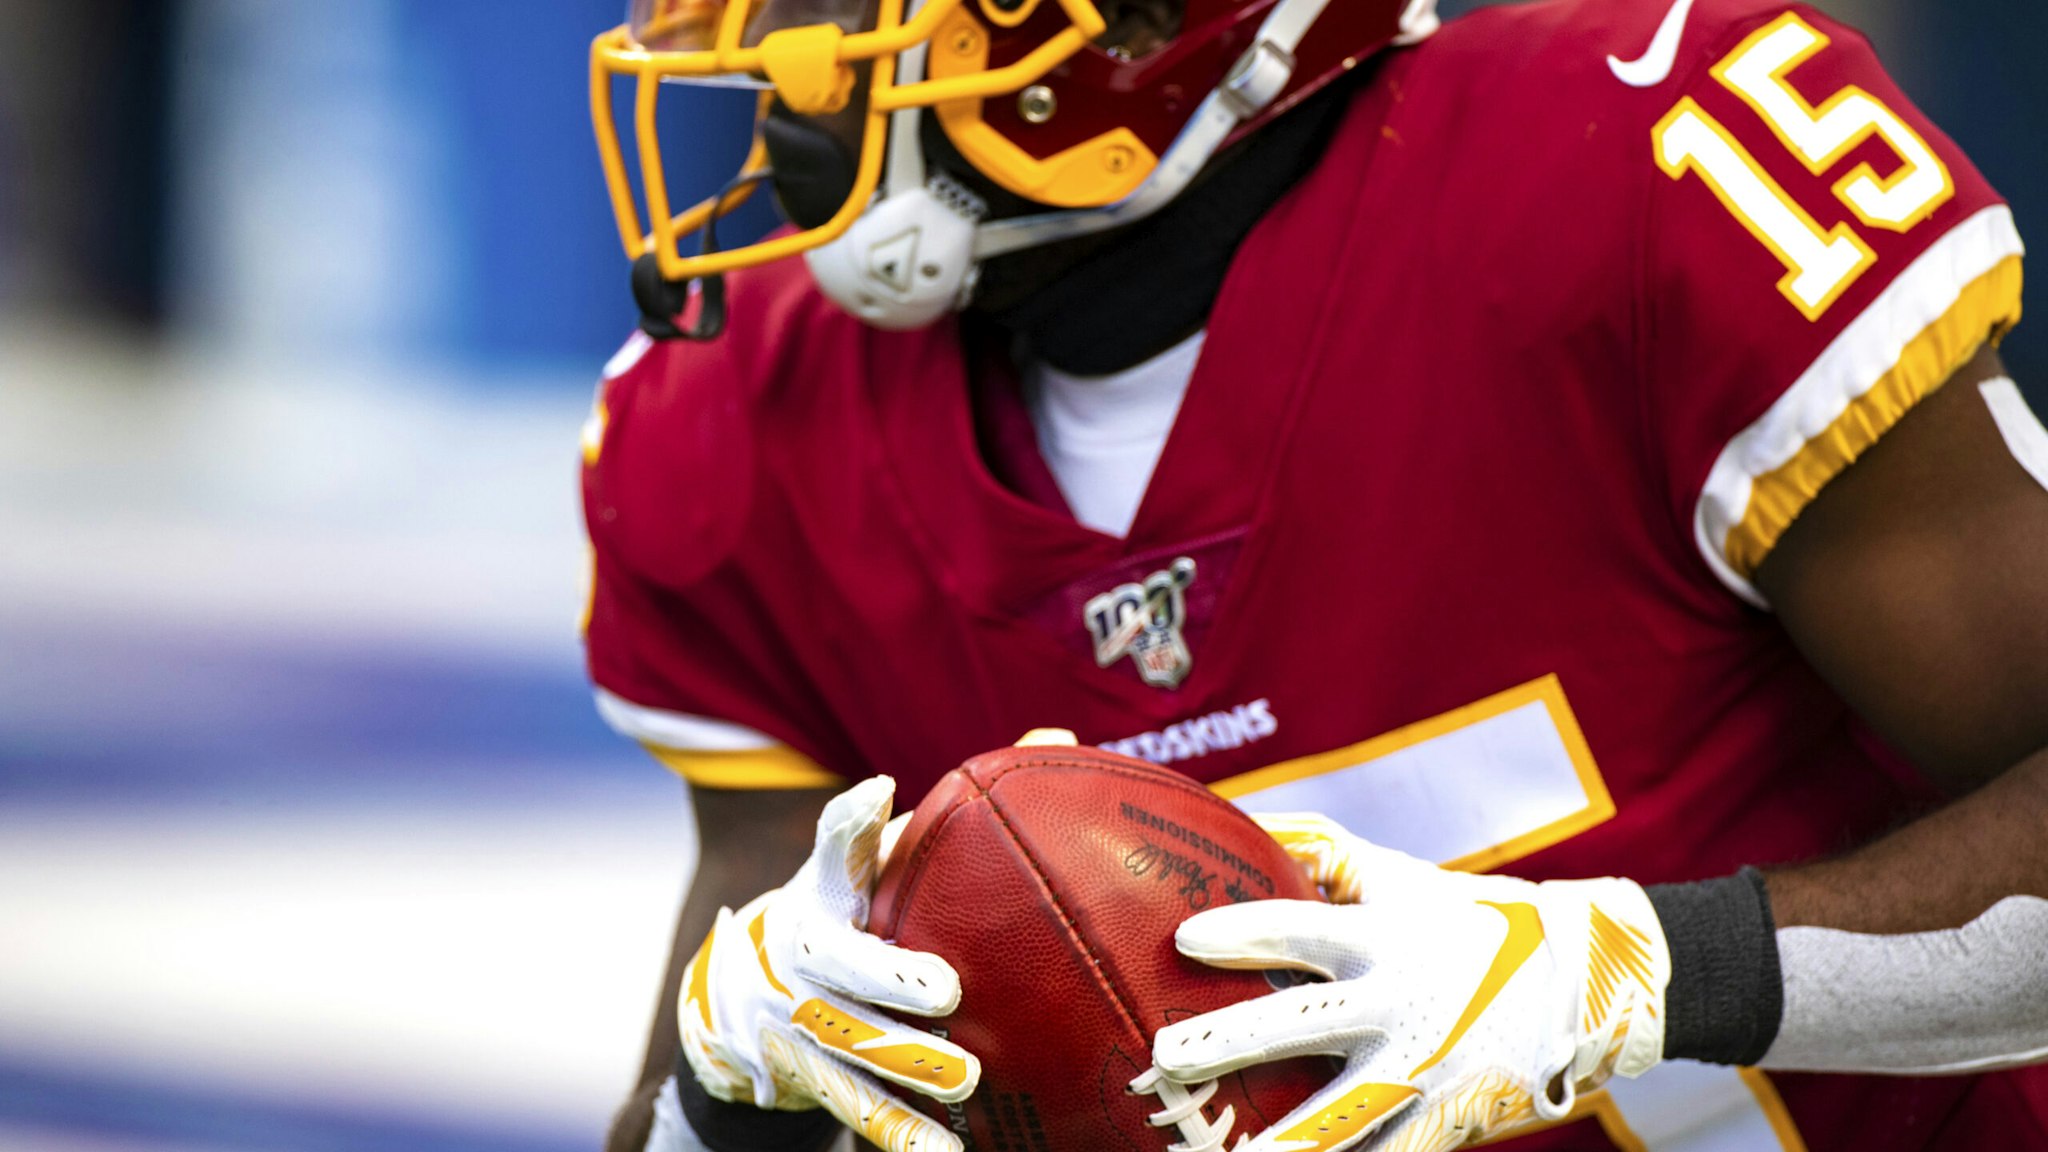 ORCHARD PARK, NY - NOVEMBER 03: Detail view of Nike football gloves worn by Steven Sims #15 of the Washington Redskins as he fields a kickoff during the first quarter against the Buffalo Bills at New Era Field on November 3, 2019 in Orchard Park, New York. Buffalo defeats Washington 24-9.